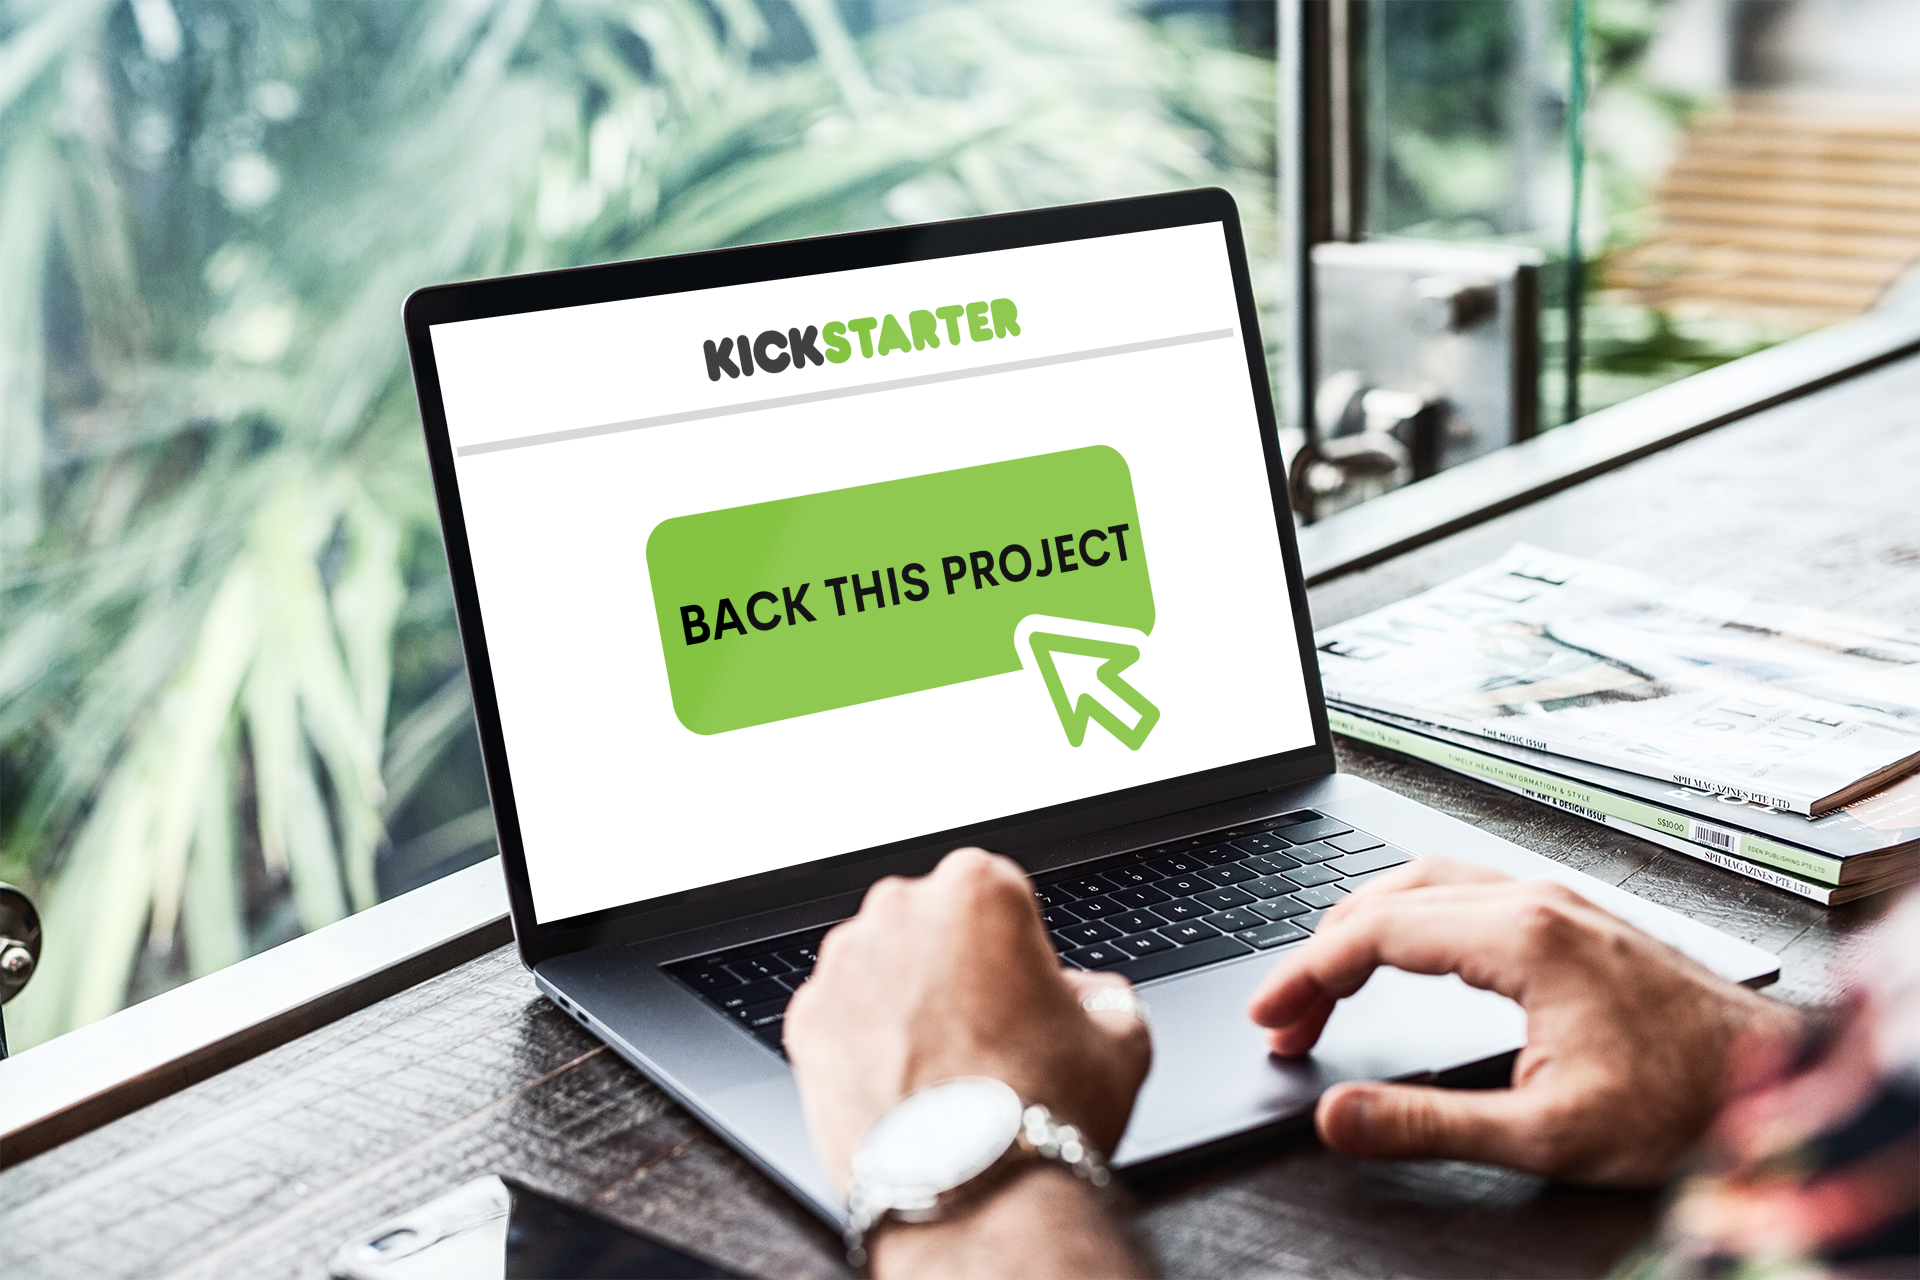 Person using a laptop selected a crowdfunding campaign on Kickstarter to back in February 2023